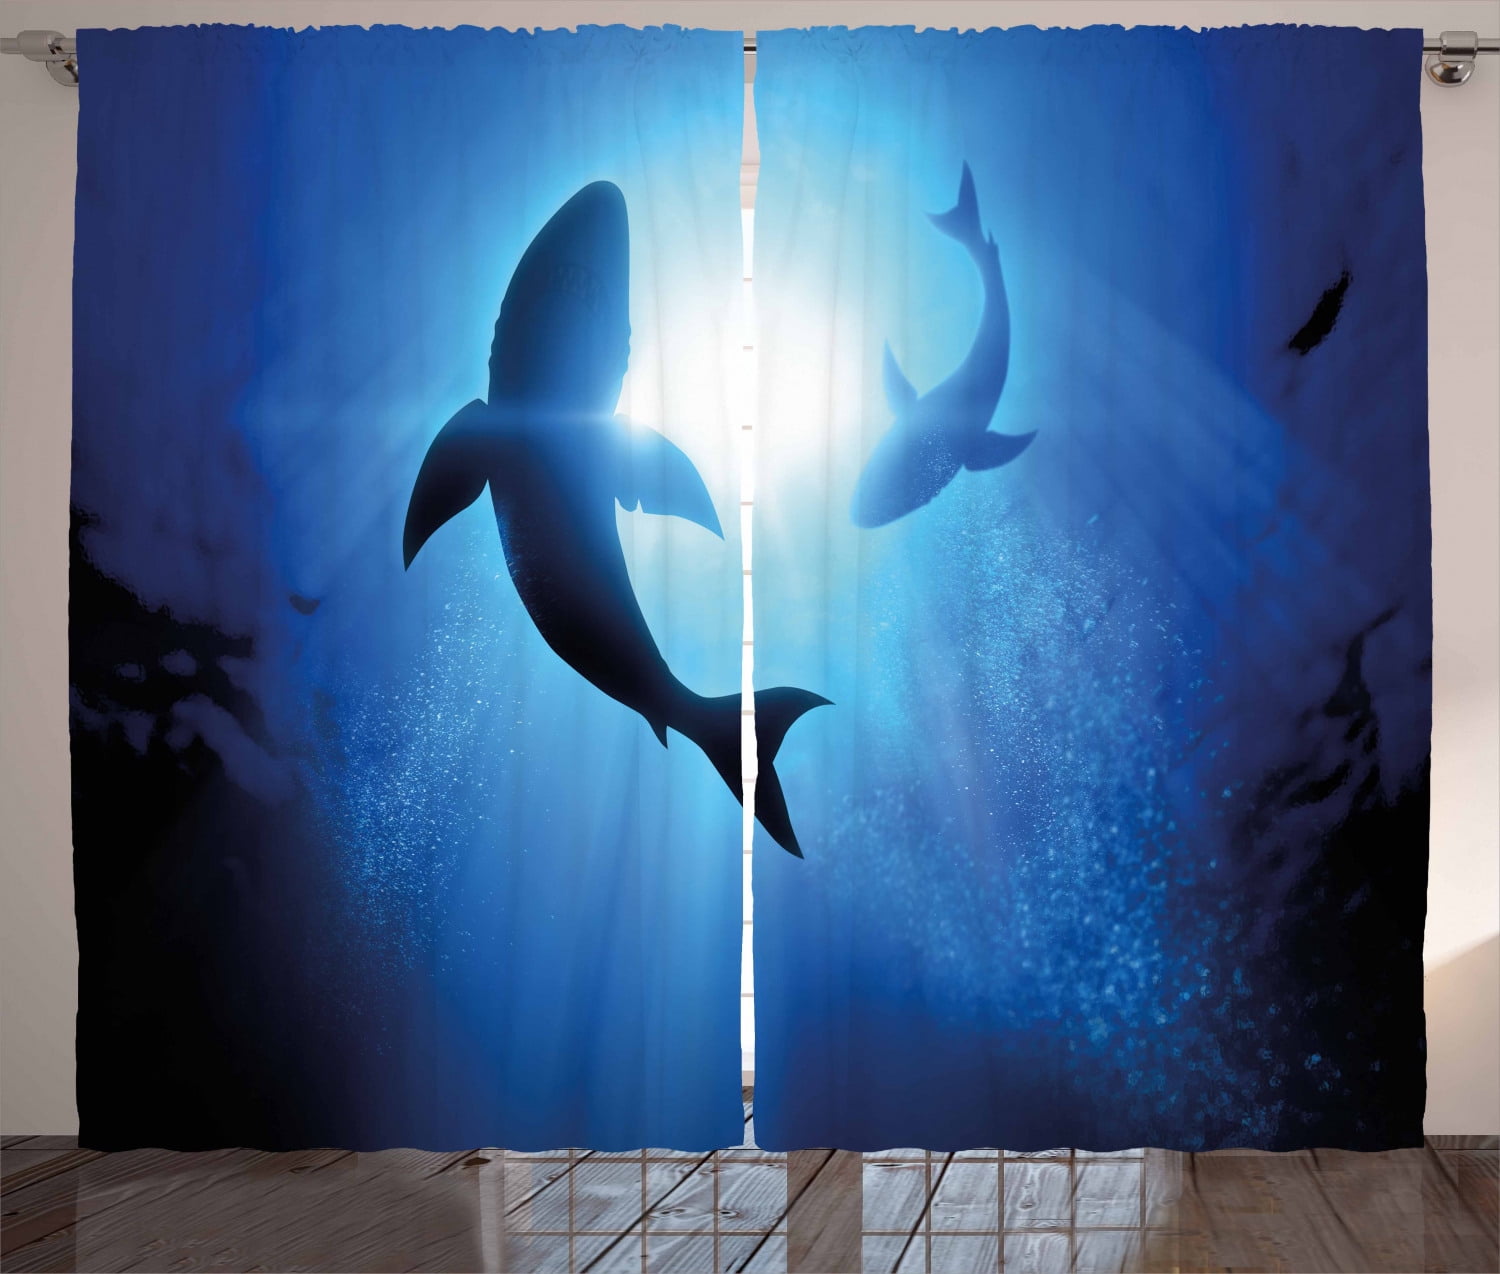 Shark Curtains Fish Silhouettes Swimming Window Drapes 2 Panel Set 108x84 Inches 